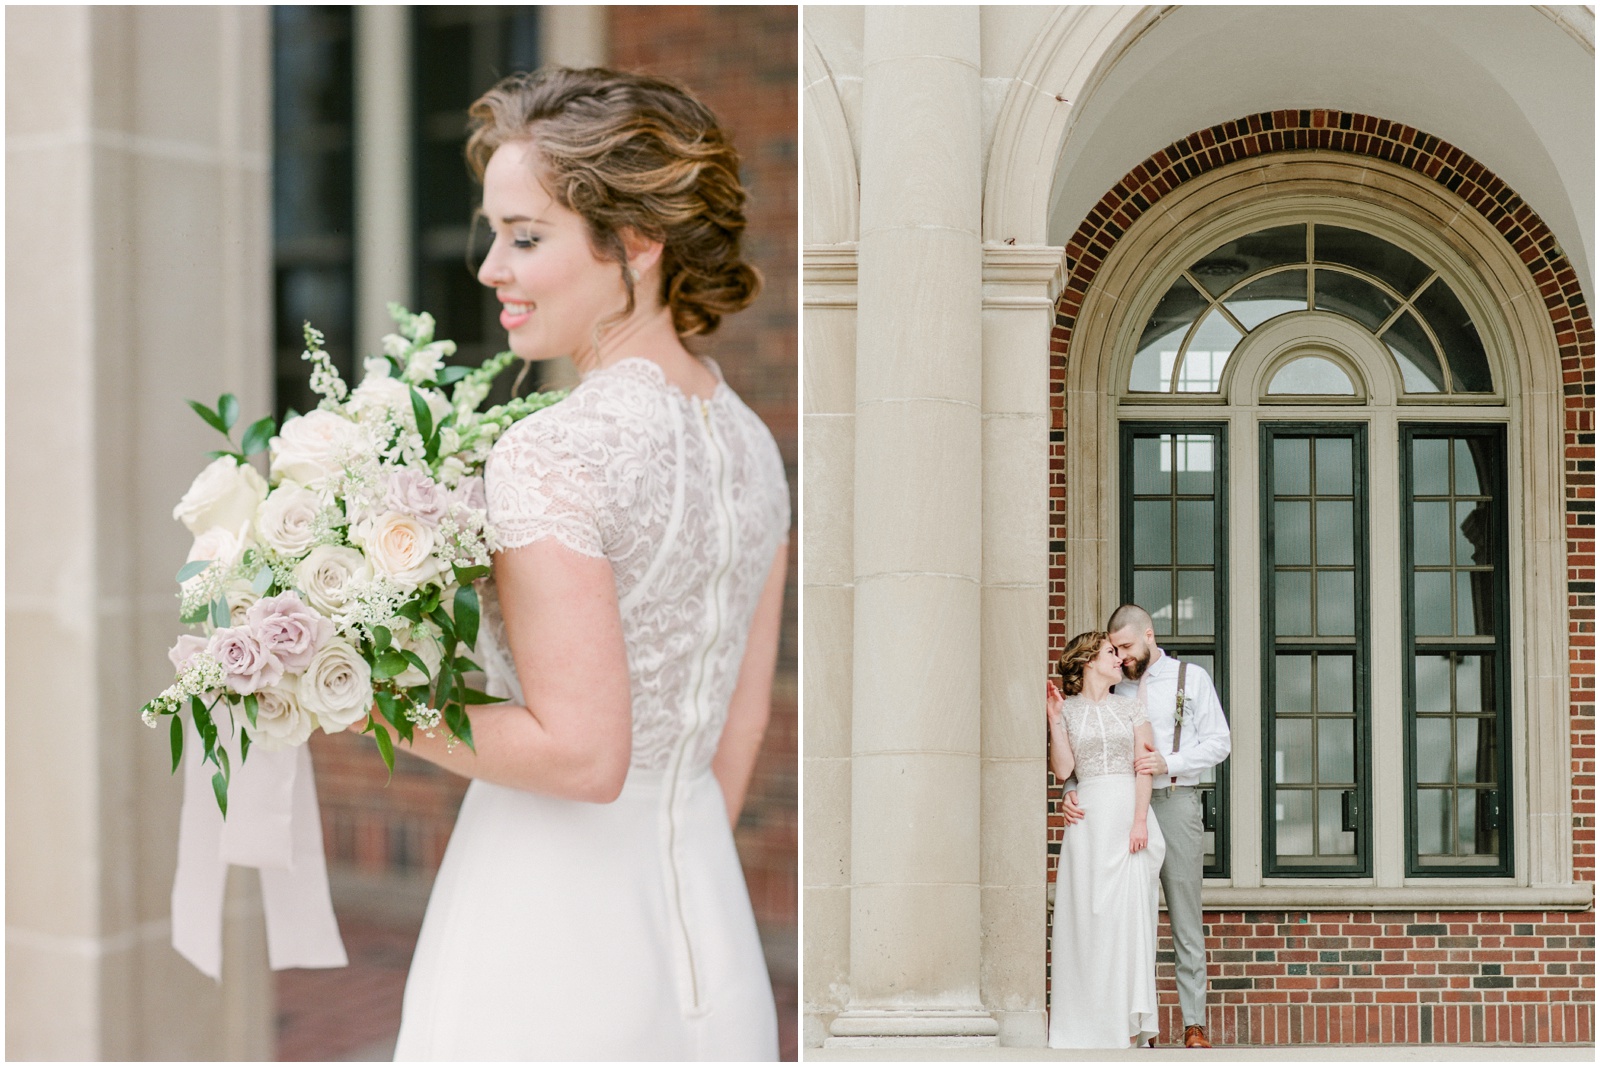 Romantic French inspired intimate wedding